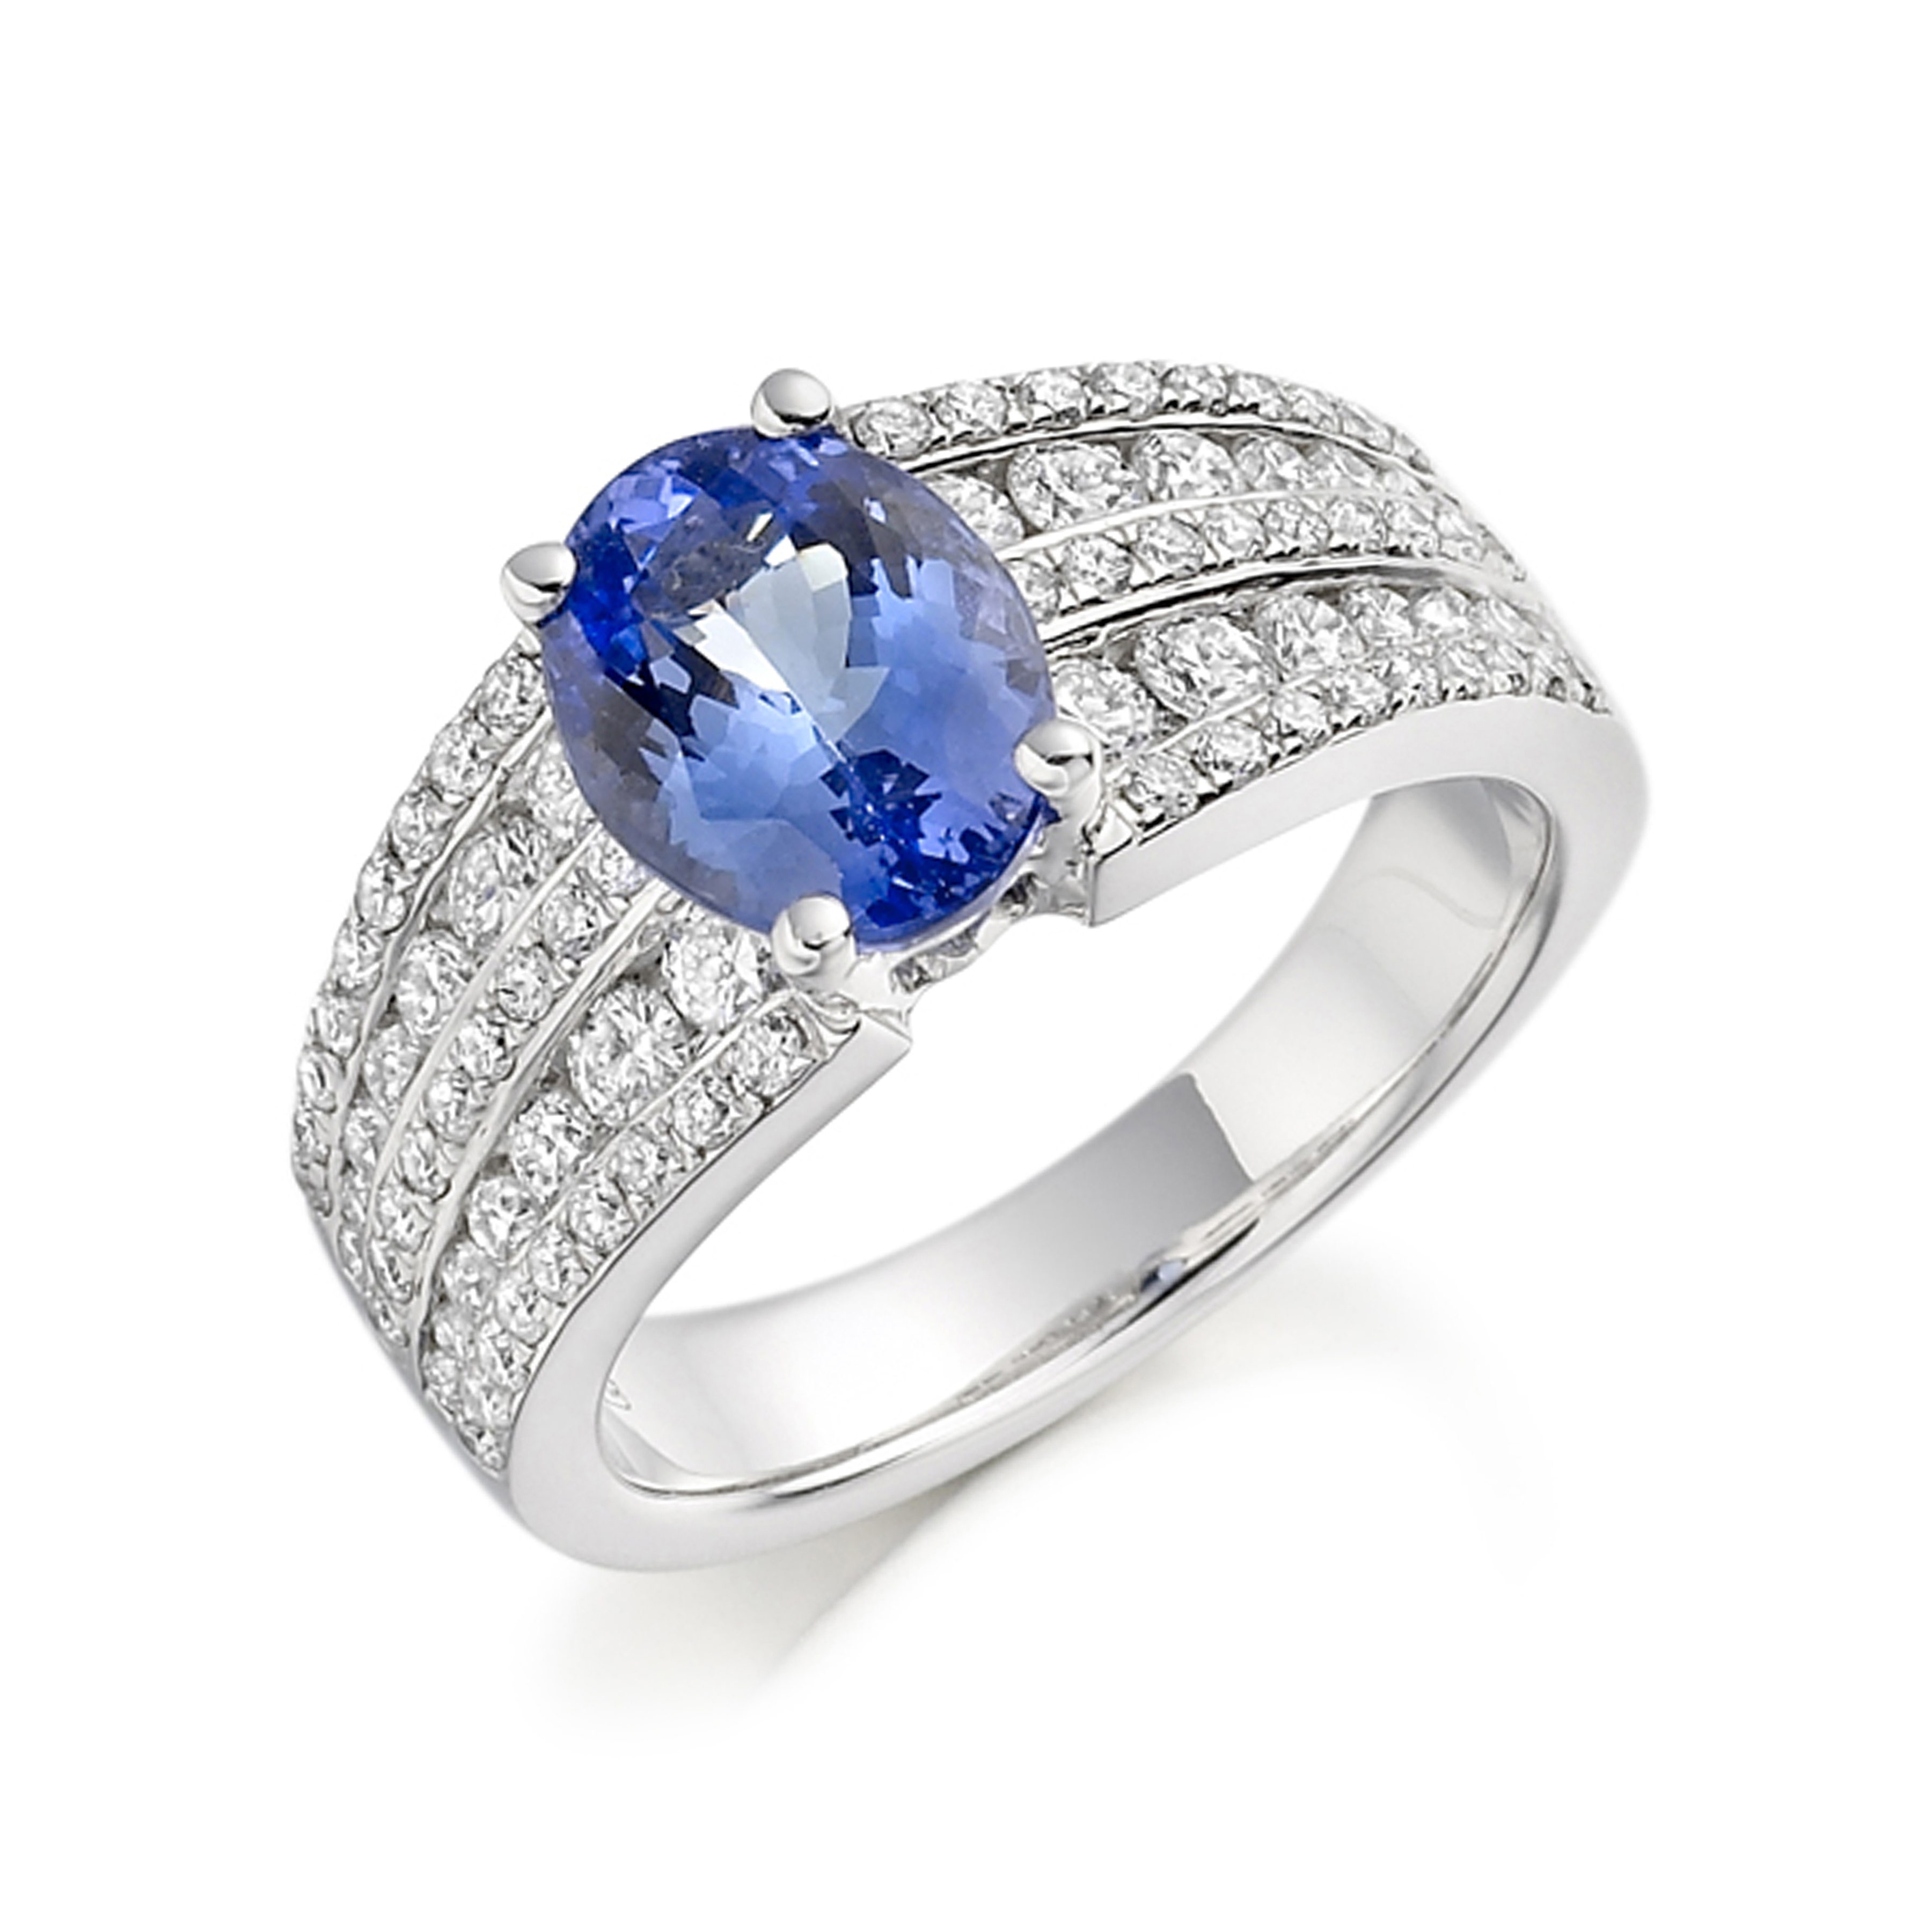 8X6mm Oval Tanzanite Stones On Shoulder Diamond And Gemstone Engagement Ring